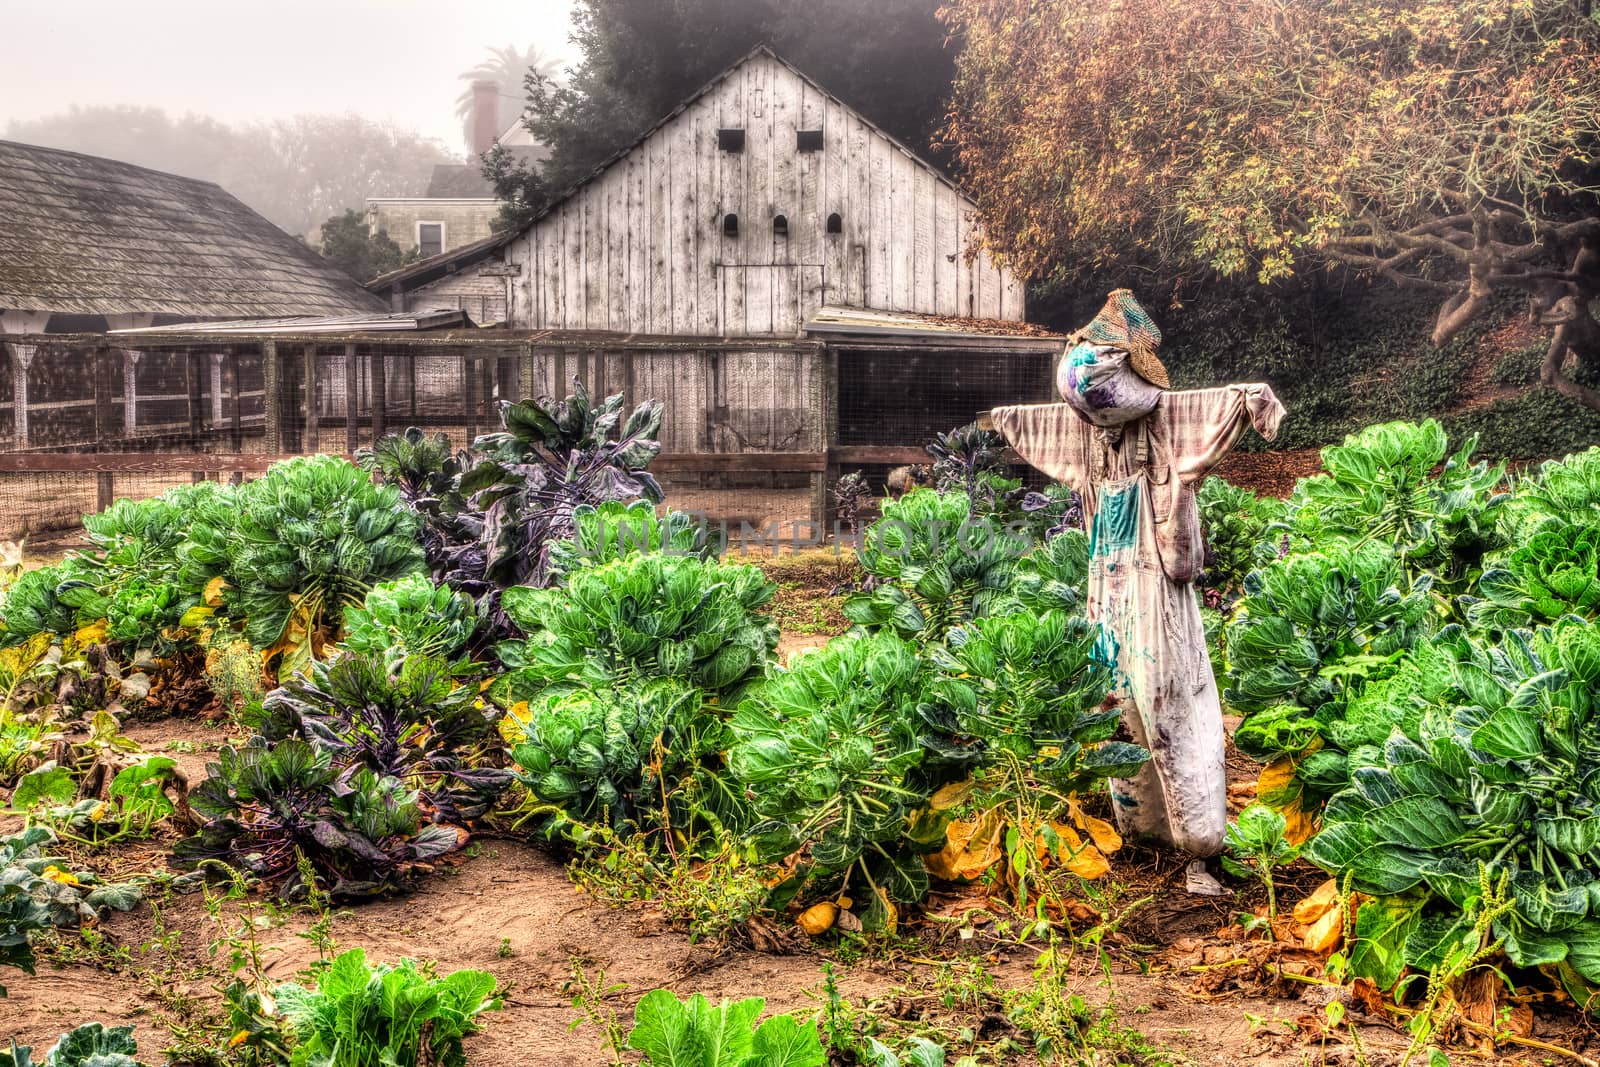 Scarecrow watches over the garden in the morning fog in the United States